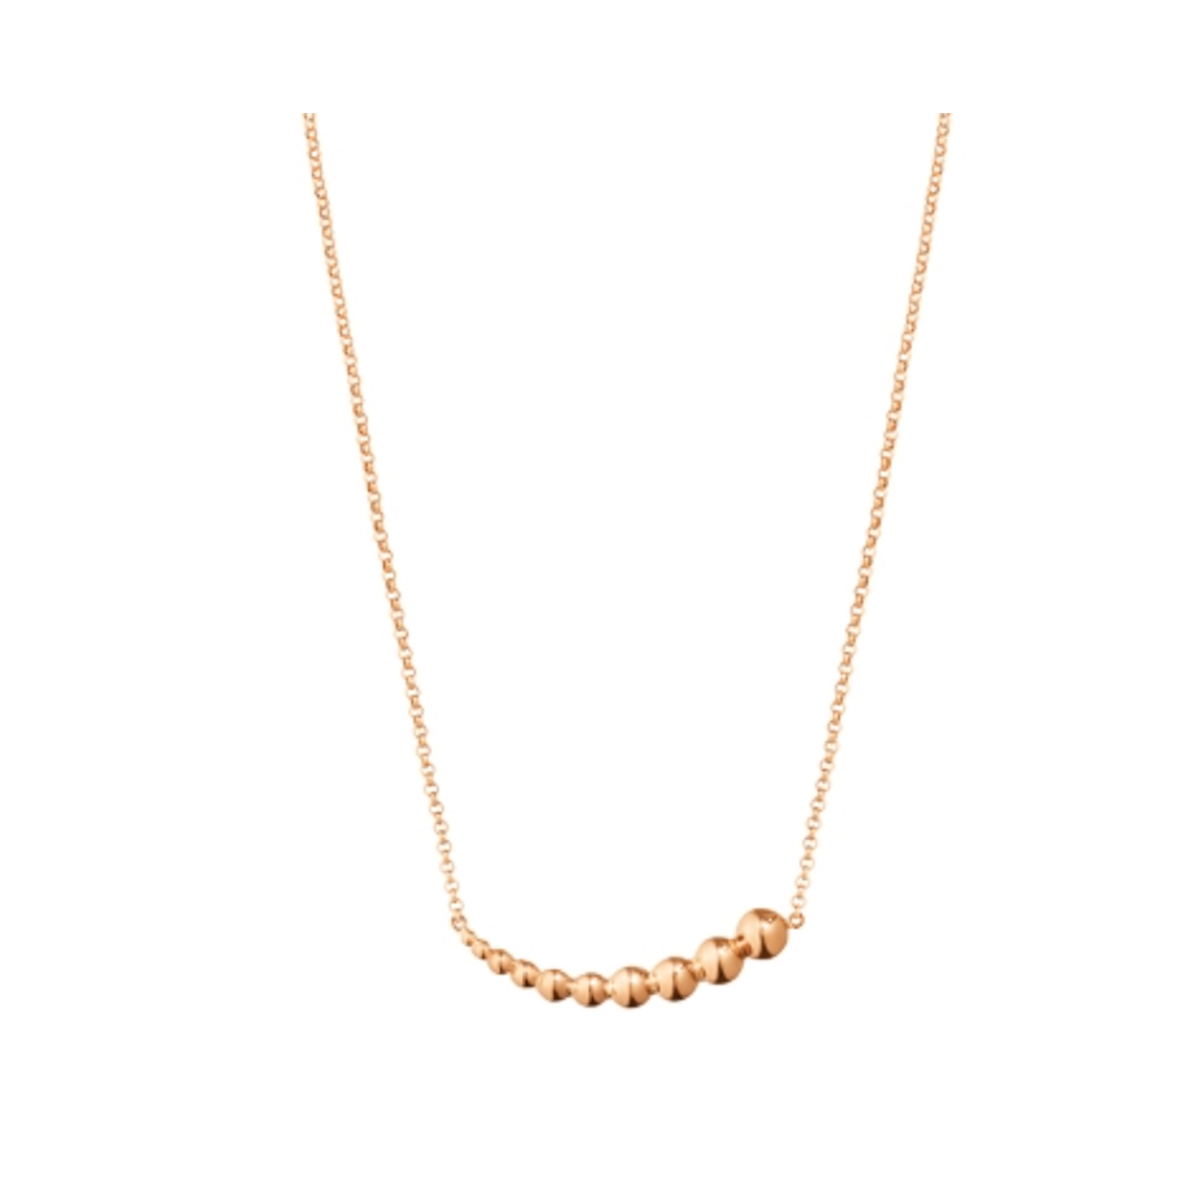 Moonlight Grapes 18ct Rose Gold Necklace